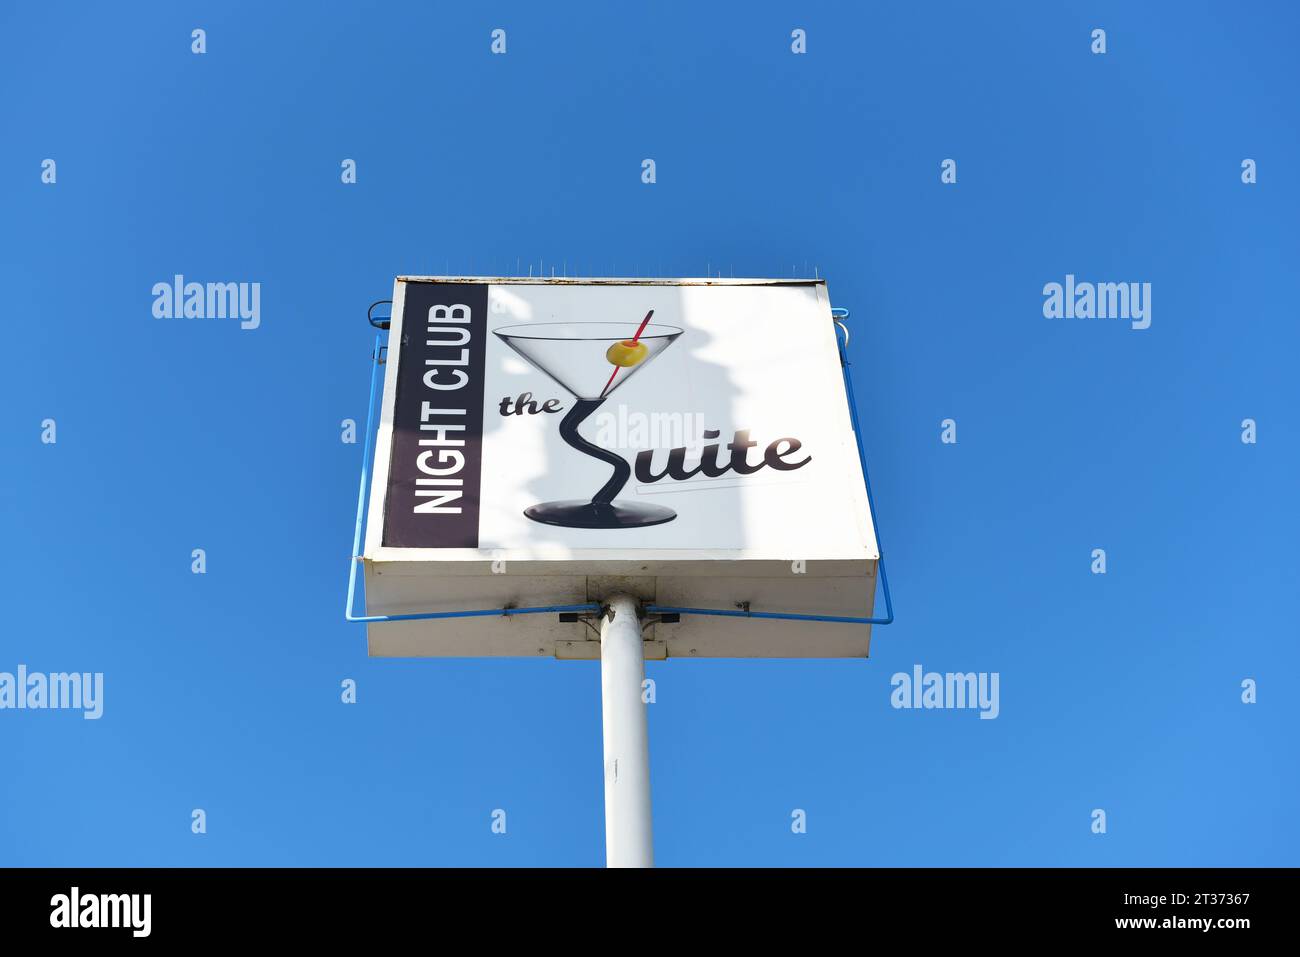 LONG BEACH, CALIFORNIA - 18 OCT 2023: The Suite Night Club sign against a bright blue sky, Pacific Coast Highway, PCH. Stock Photo